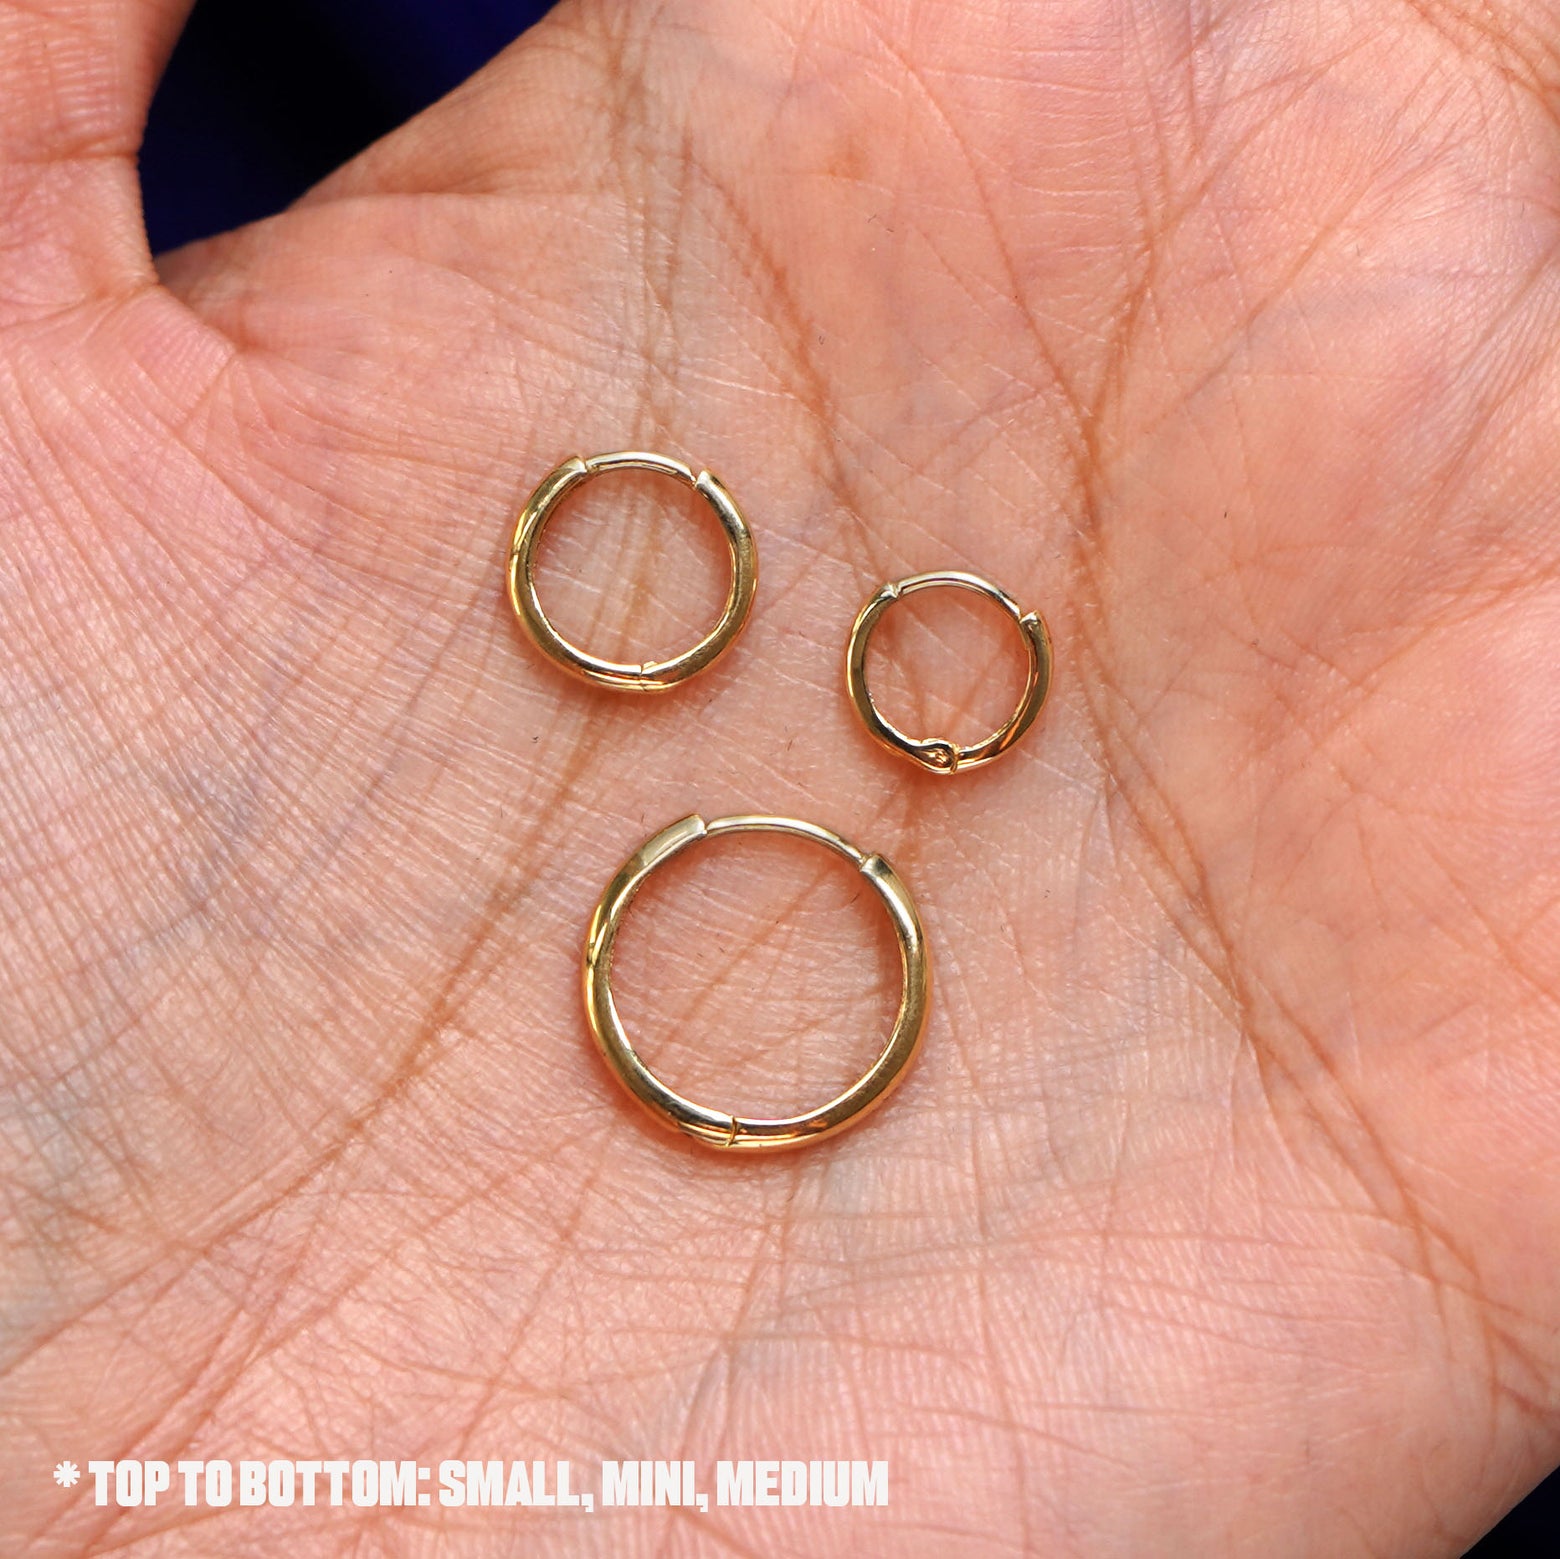 Three versions of the Curvy Huggie Hoops shown in medium, small, and mini sizes